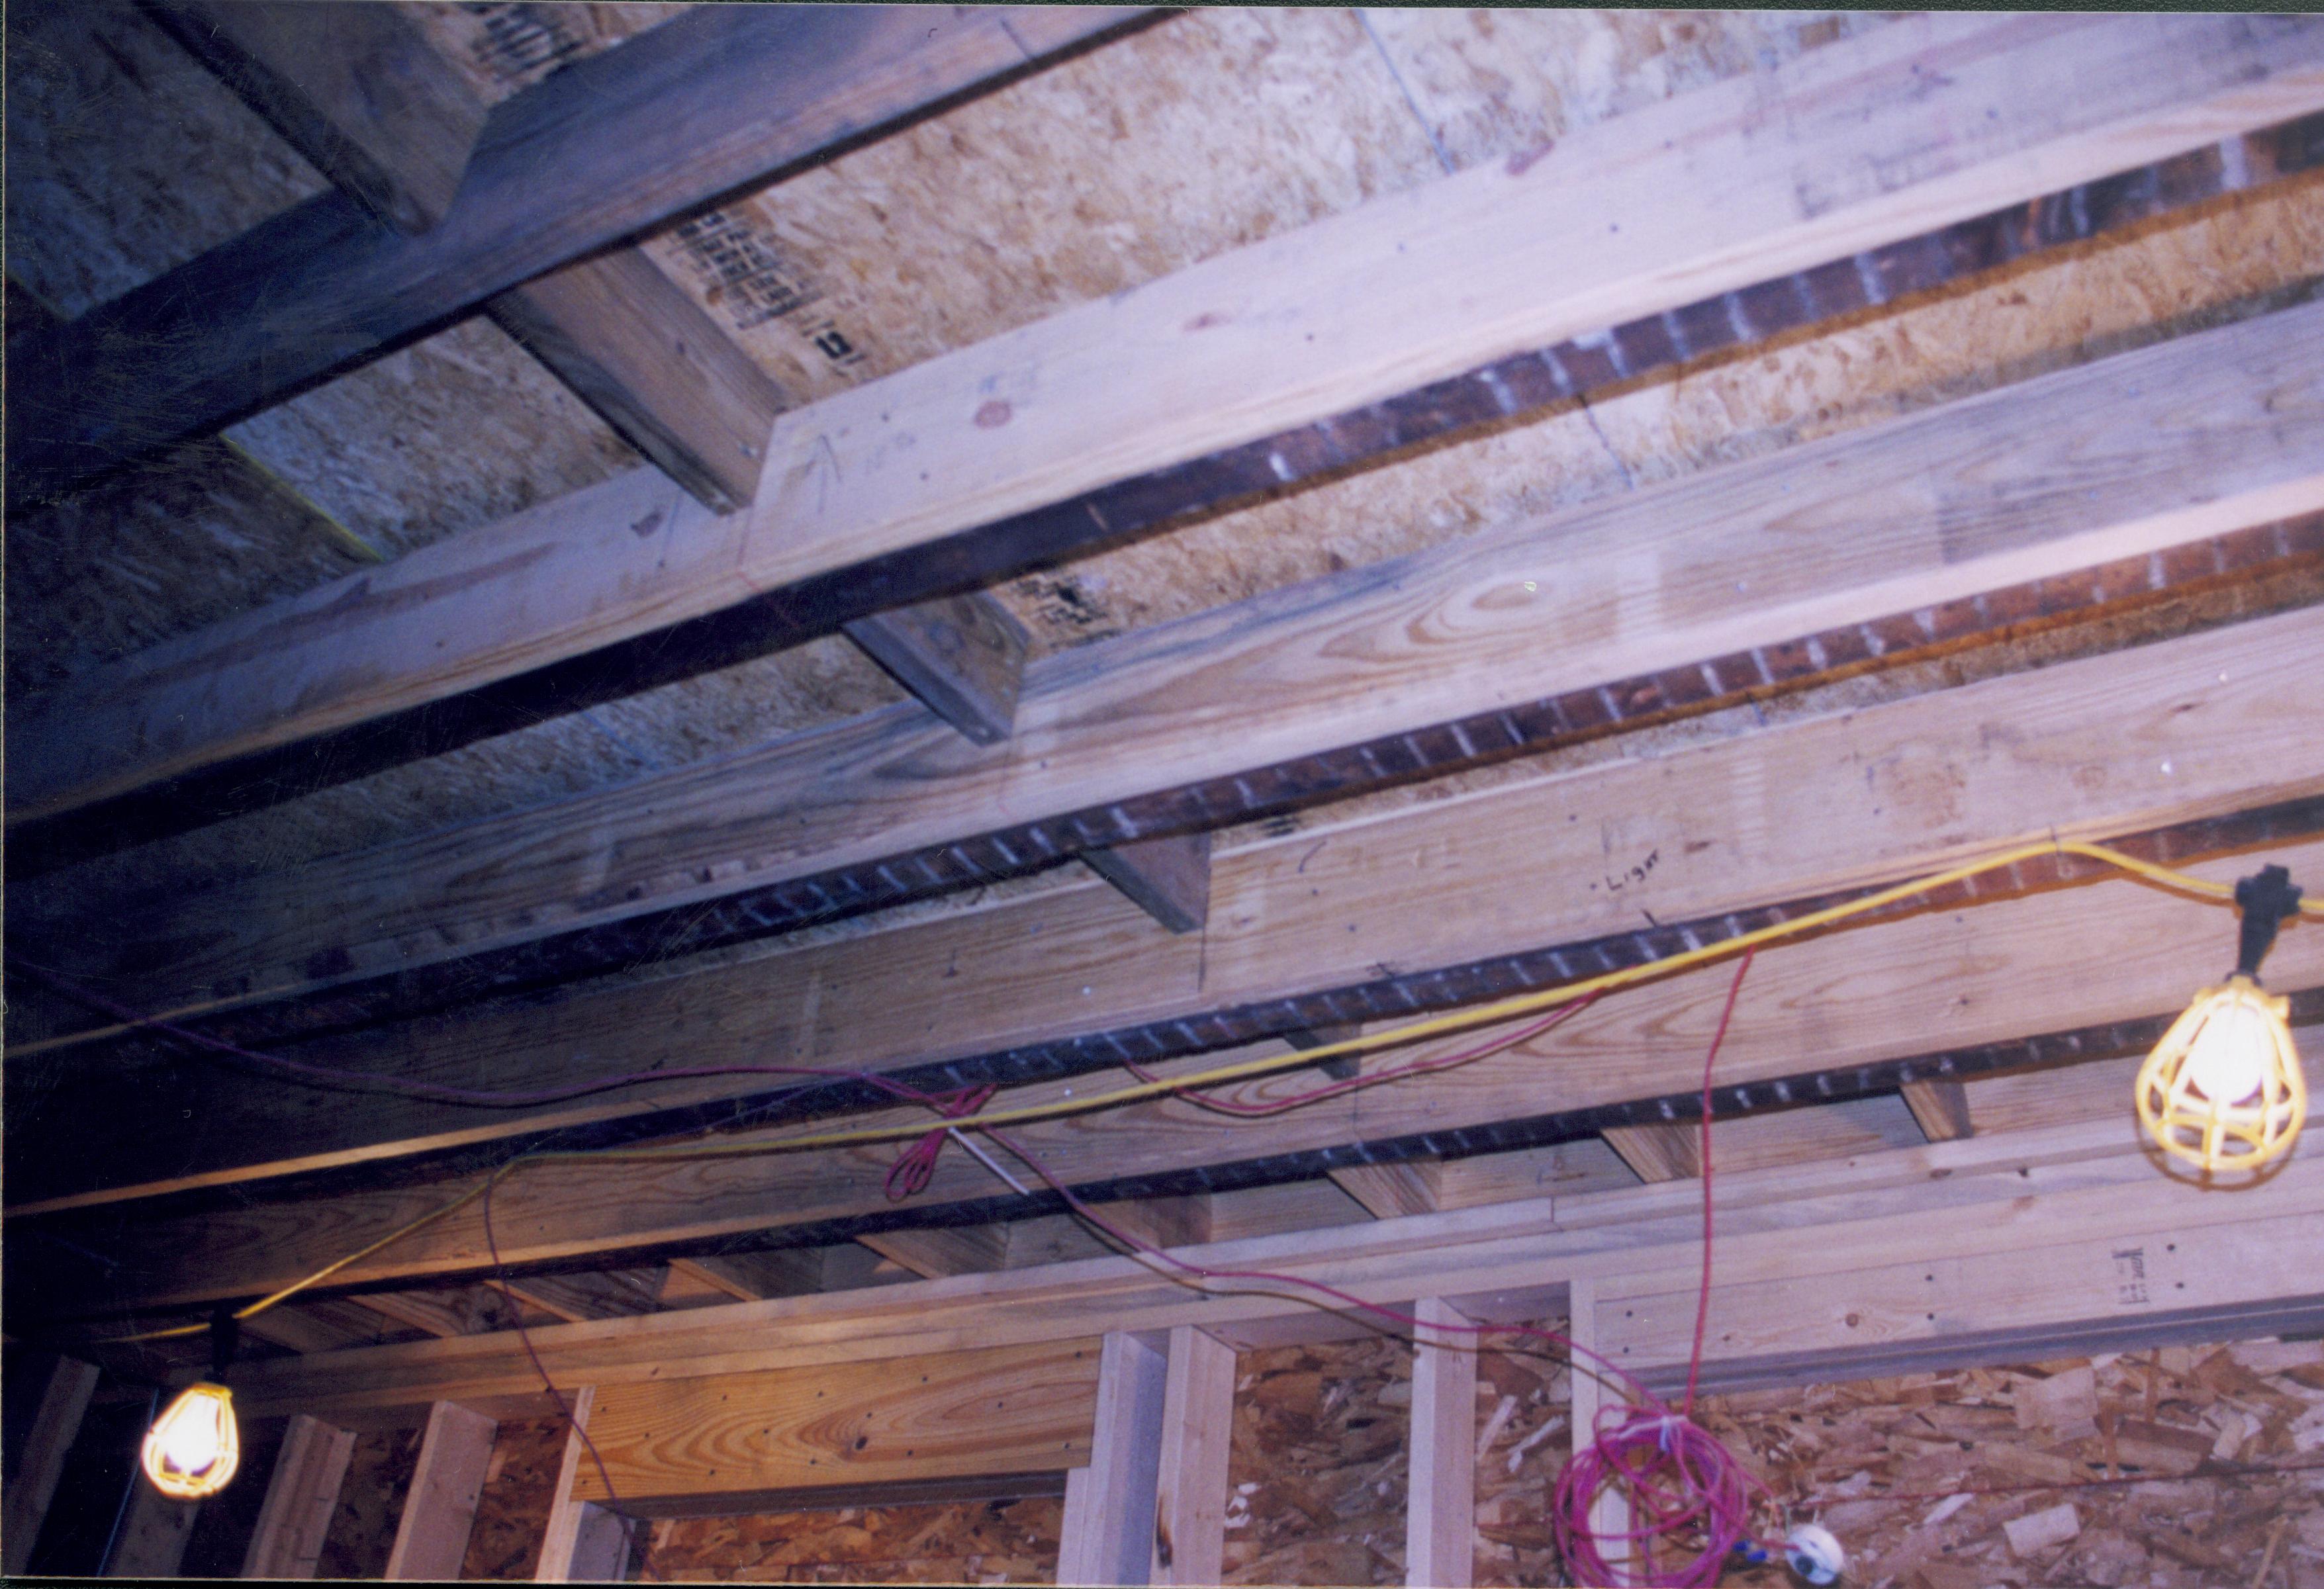 Dubois House restoration - new ceiling joists sistered in with original. New plywood subflooring visible above joists Looking South from Dubois House Dubois, joists, ceiling, sub-flooring, utility lights